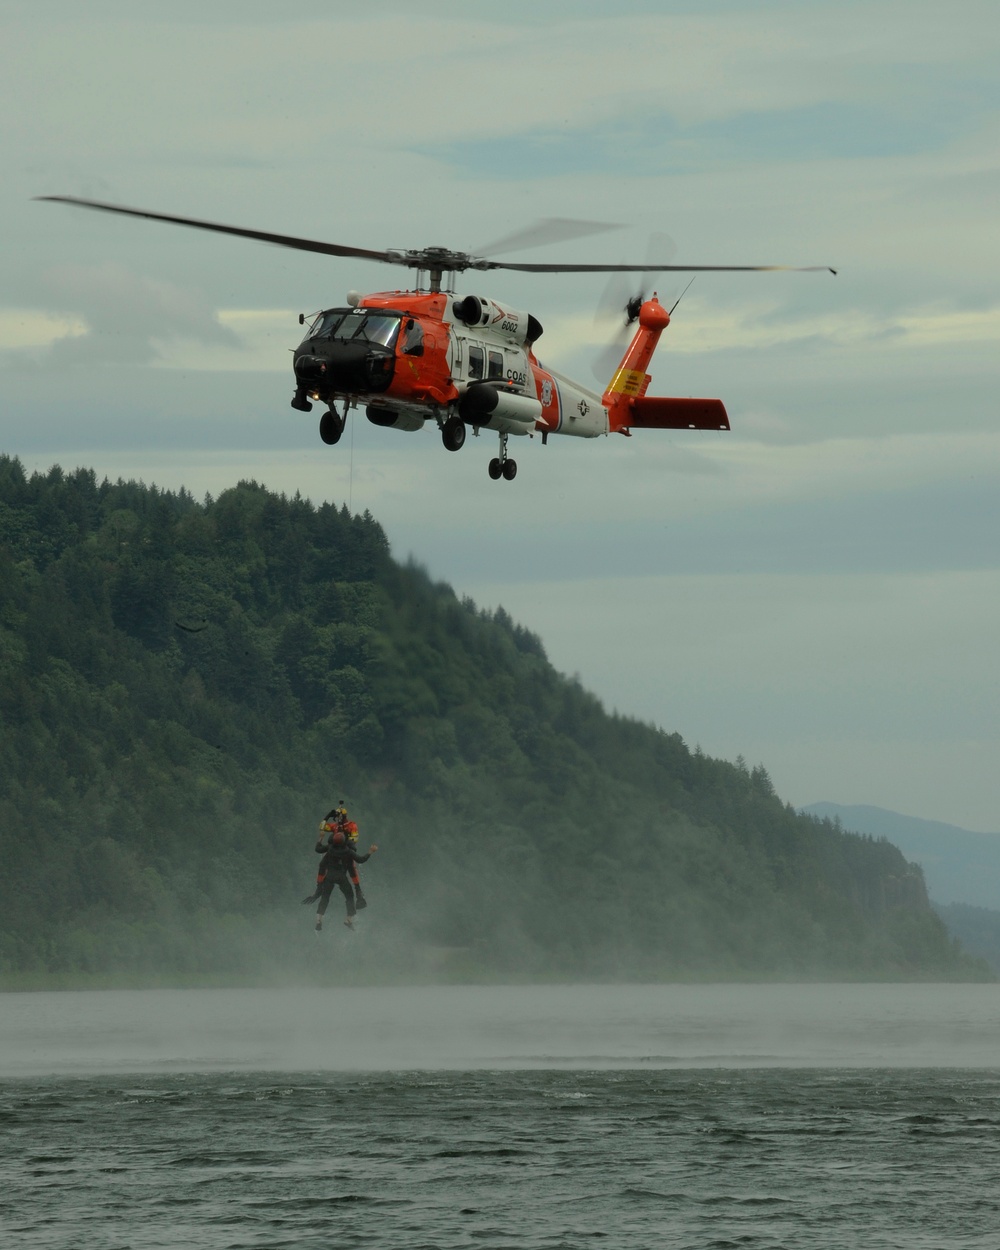 Airmen water survival training on Columbia River